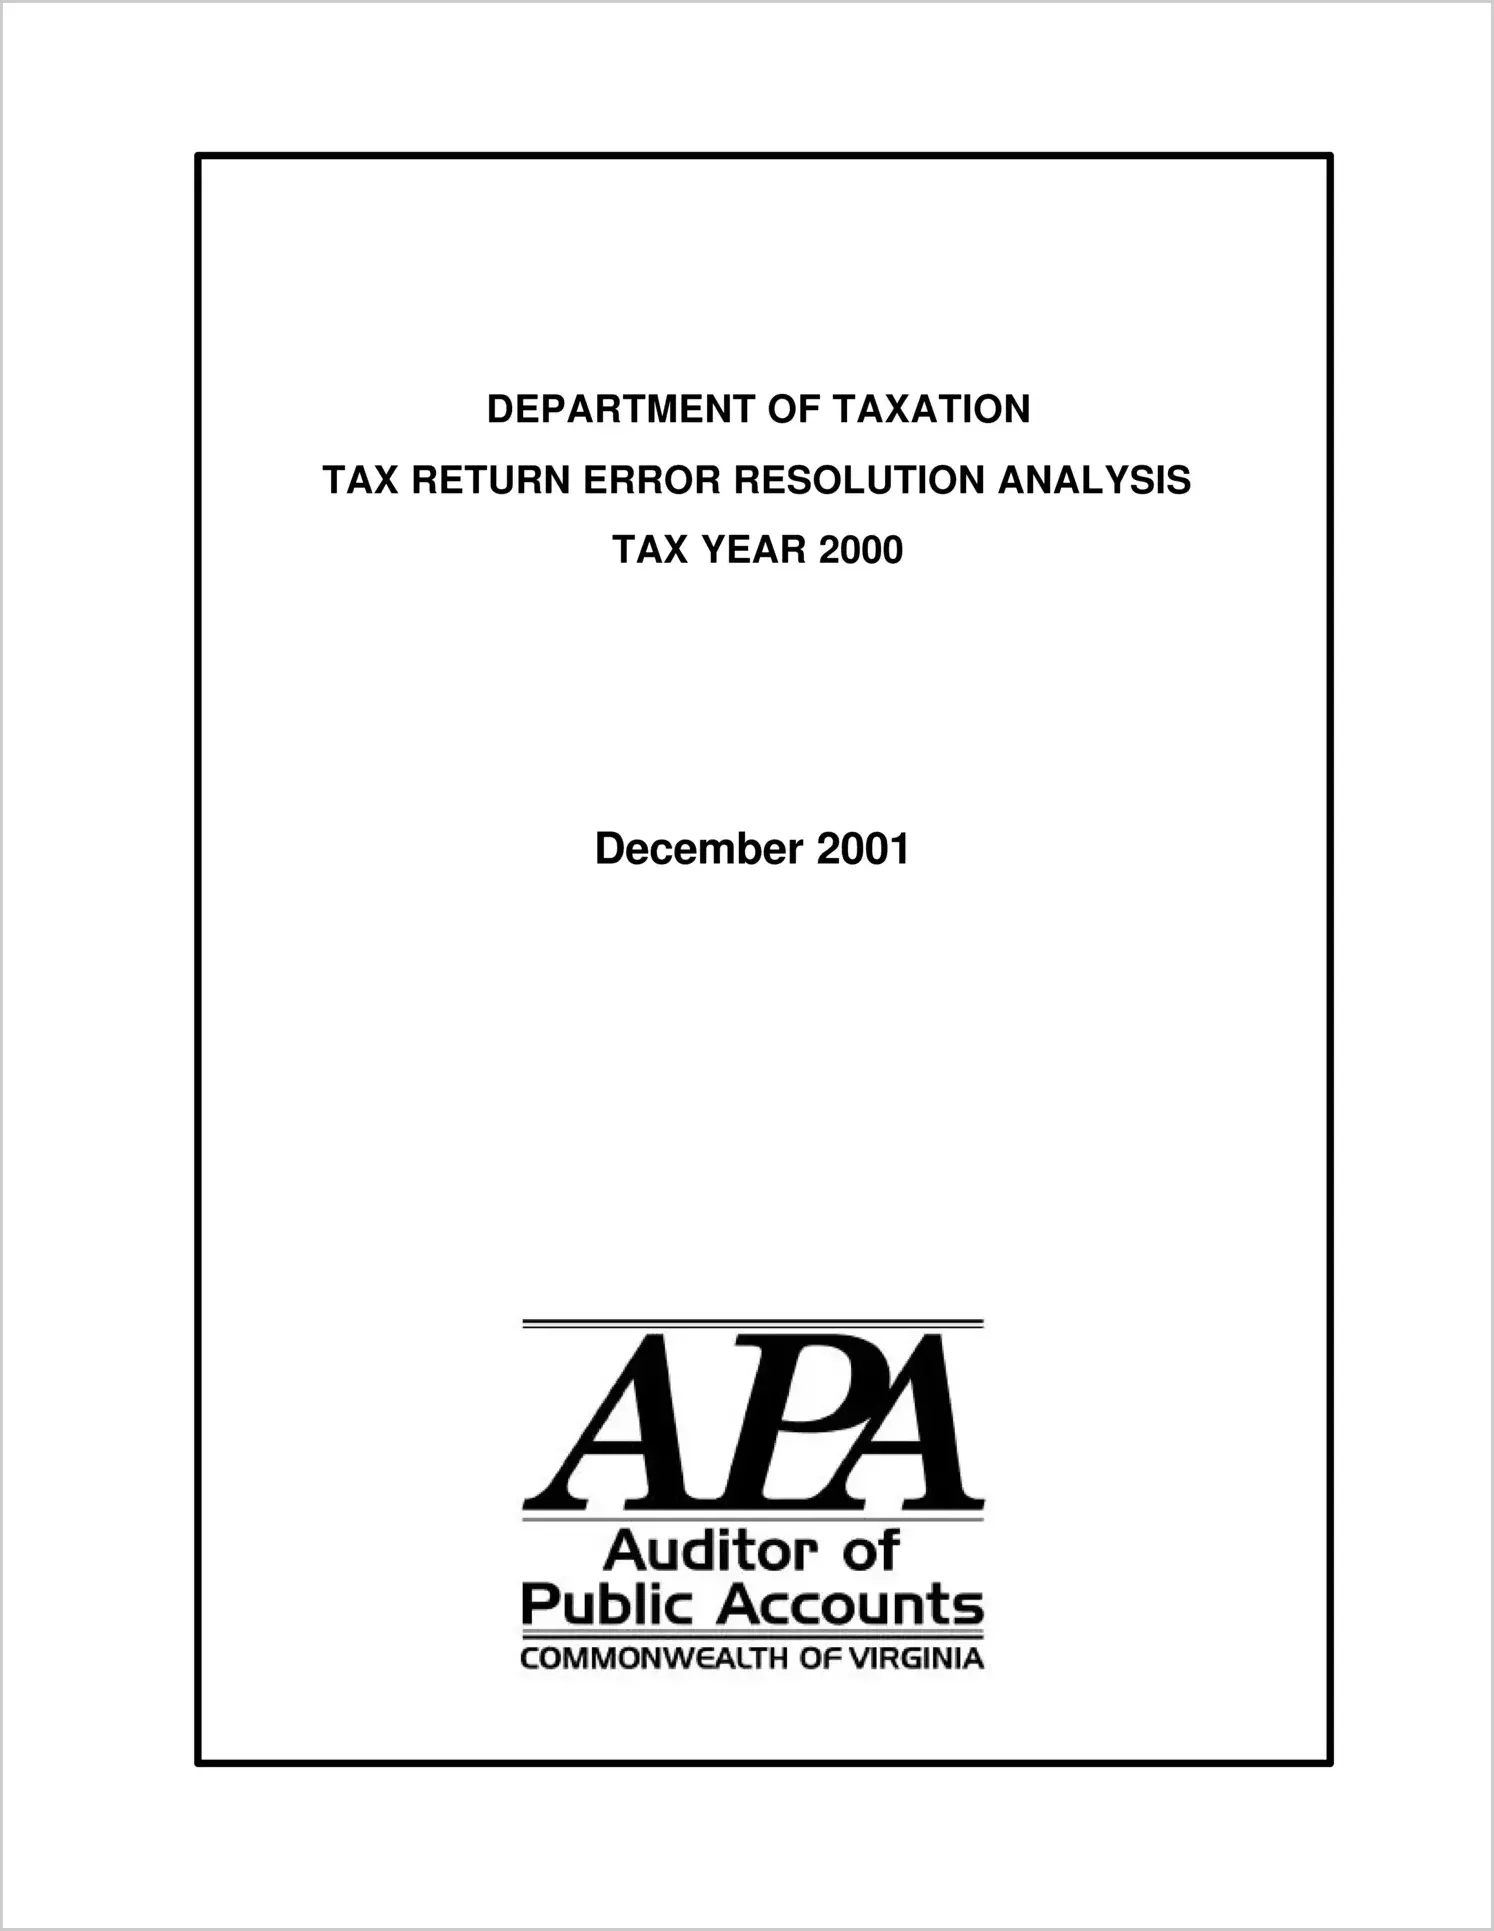 Special ReportDepartment of Taxation Tax Return Error Resolution Analysis Tax Year 2000(Report Date: 12/17/2001)